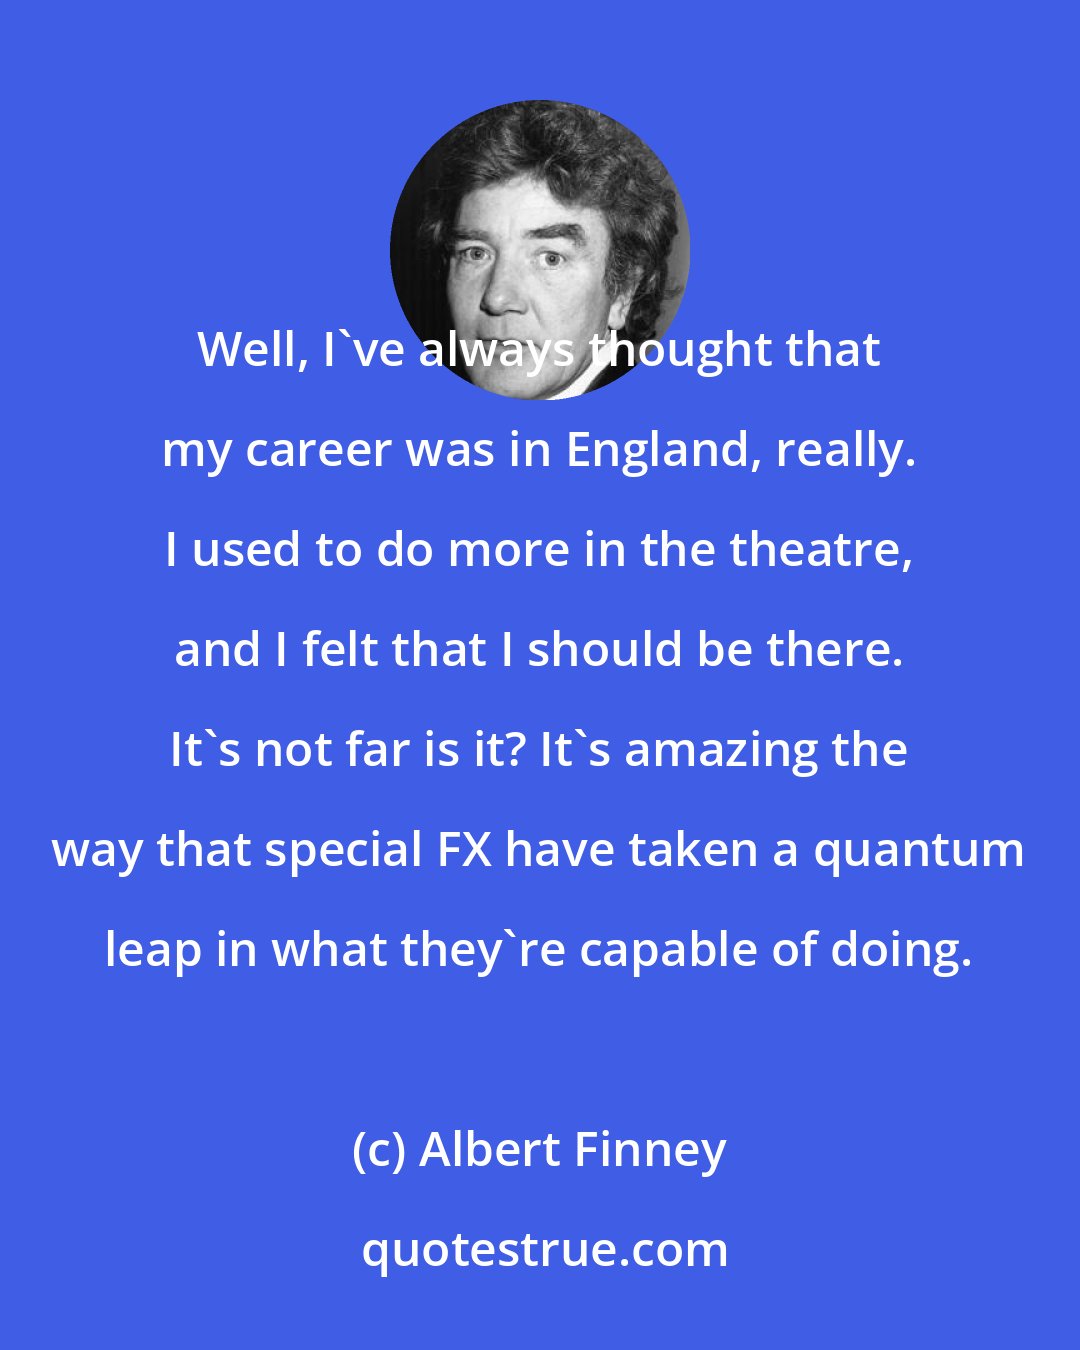 Albert Finney: Well, I've always thought that my career was in England, really. I used to do more in the theatre, and I felt that I should be there. It's not far is it? It's amazing the way that special FX have taken a quantum leap in what they're capable of doing.